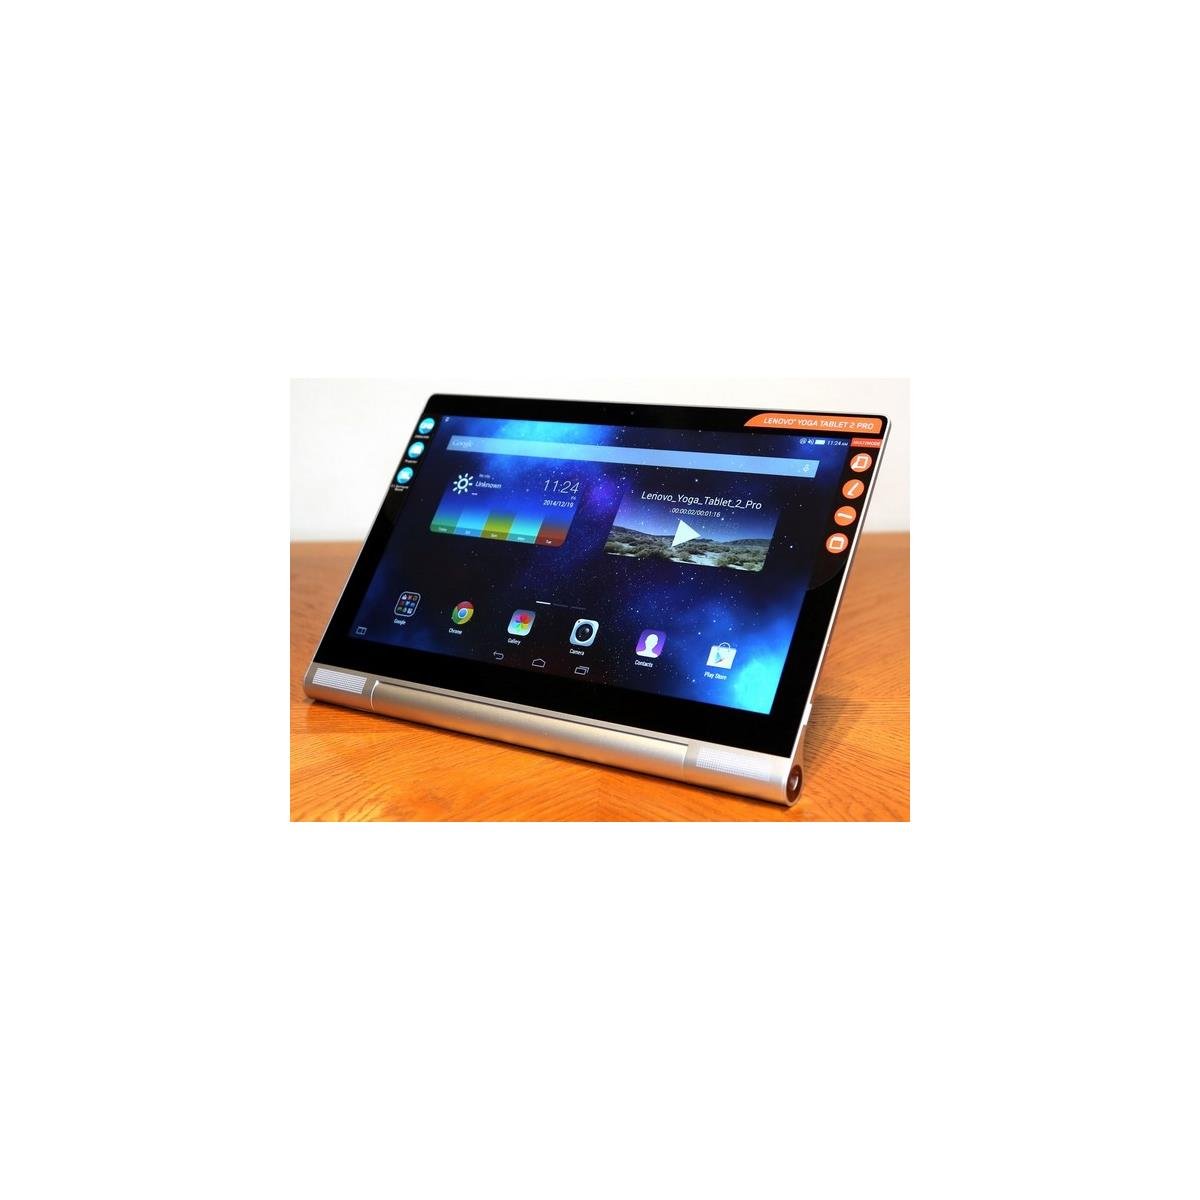 Lenovo YOGA Tablet 2 Pro With Built-In Projector Review | HotHardware